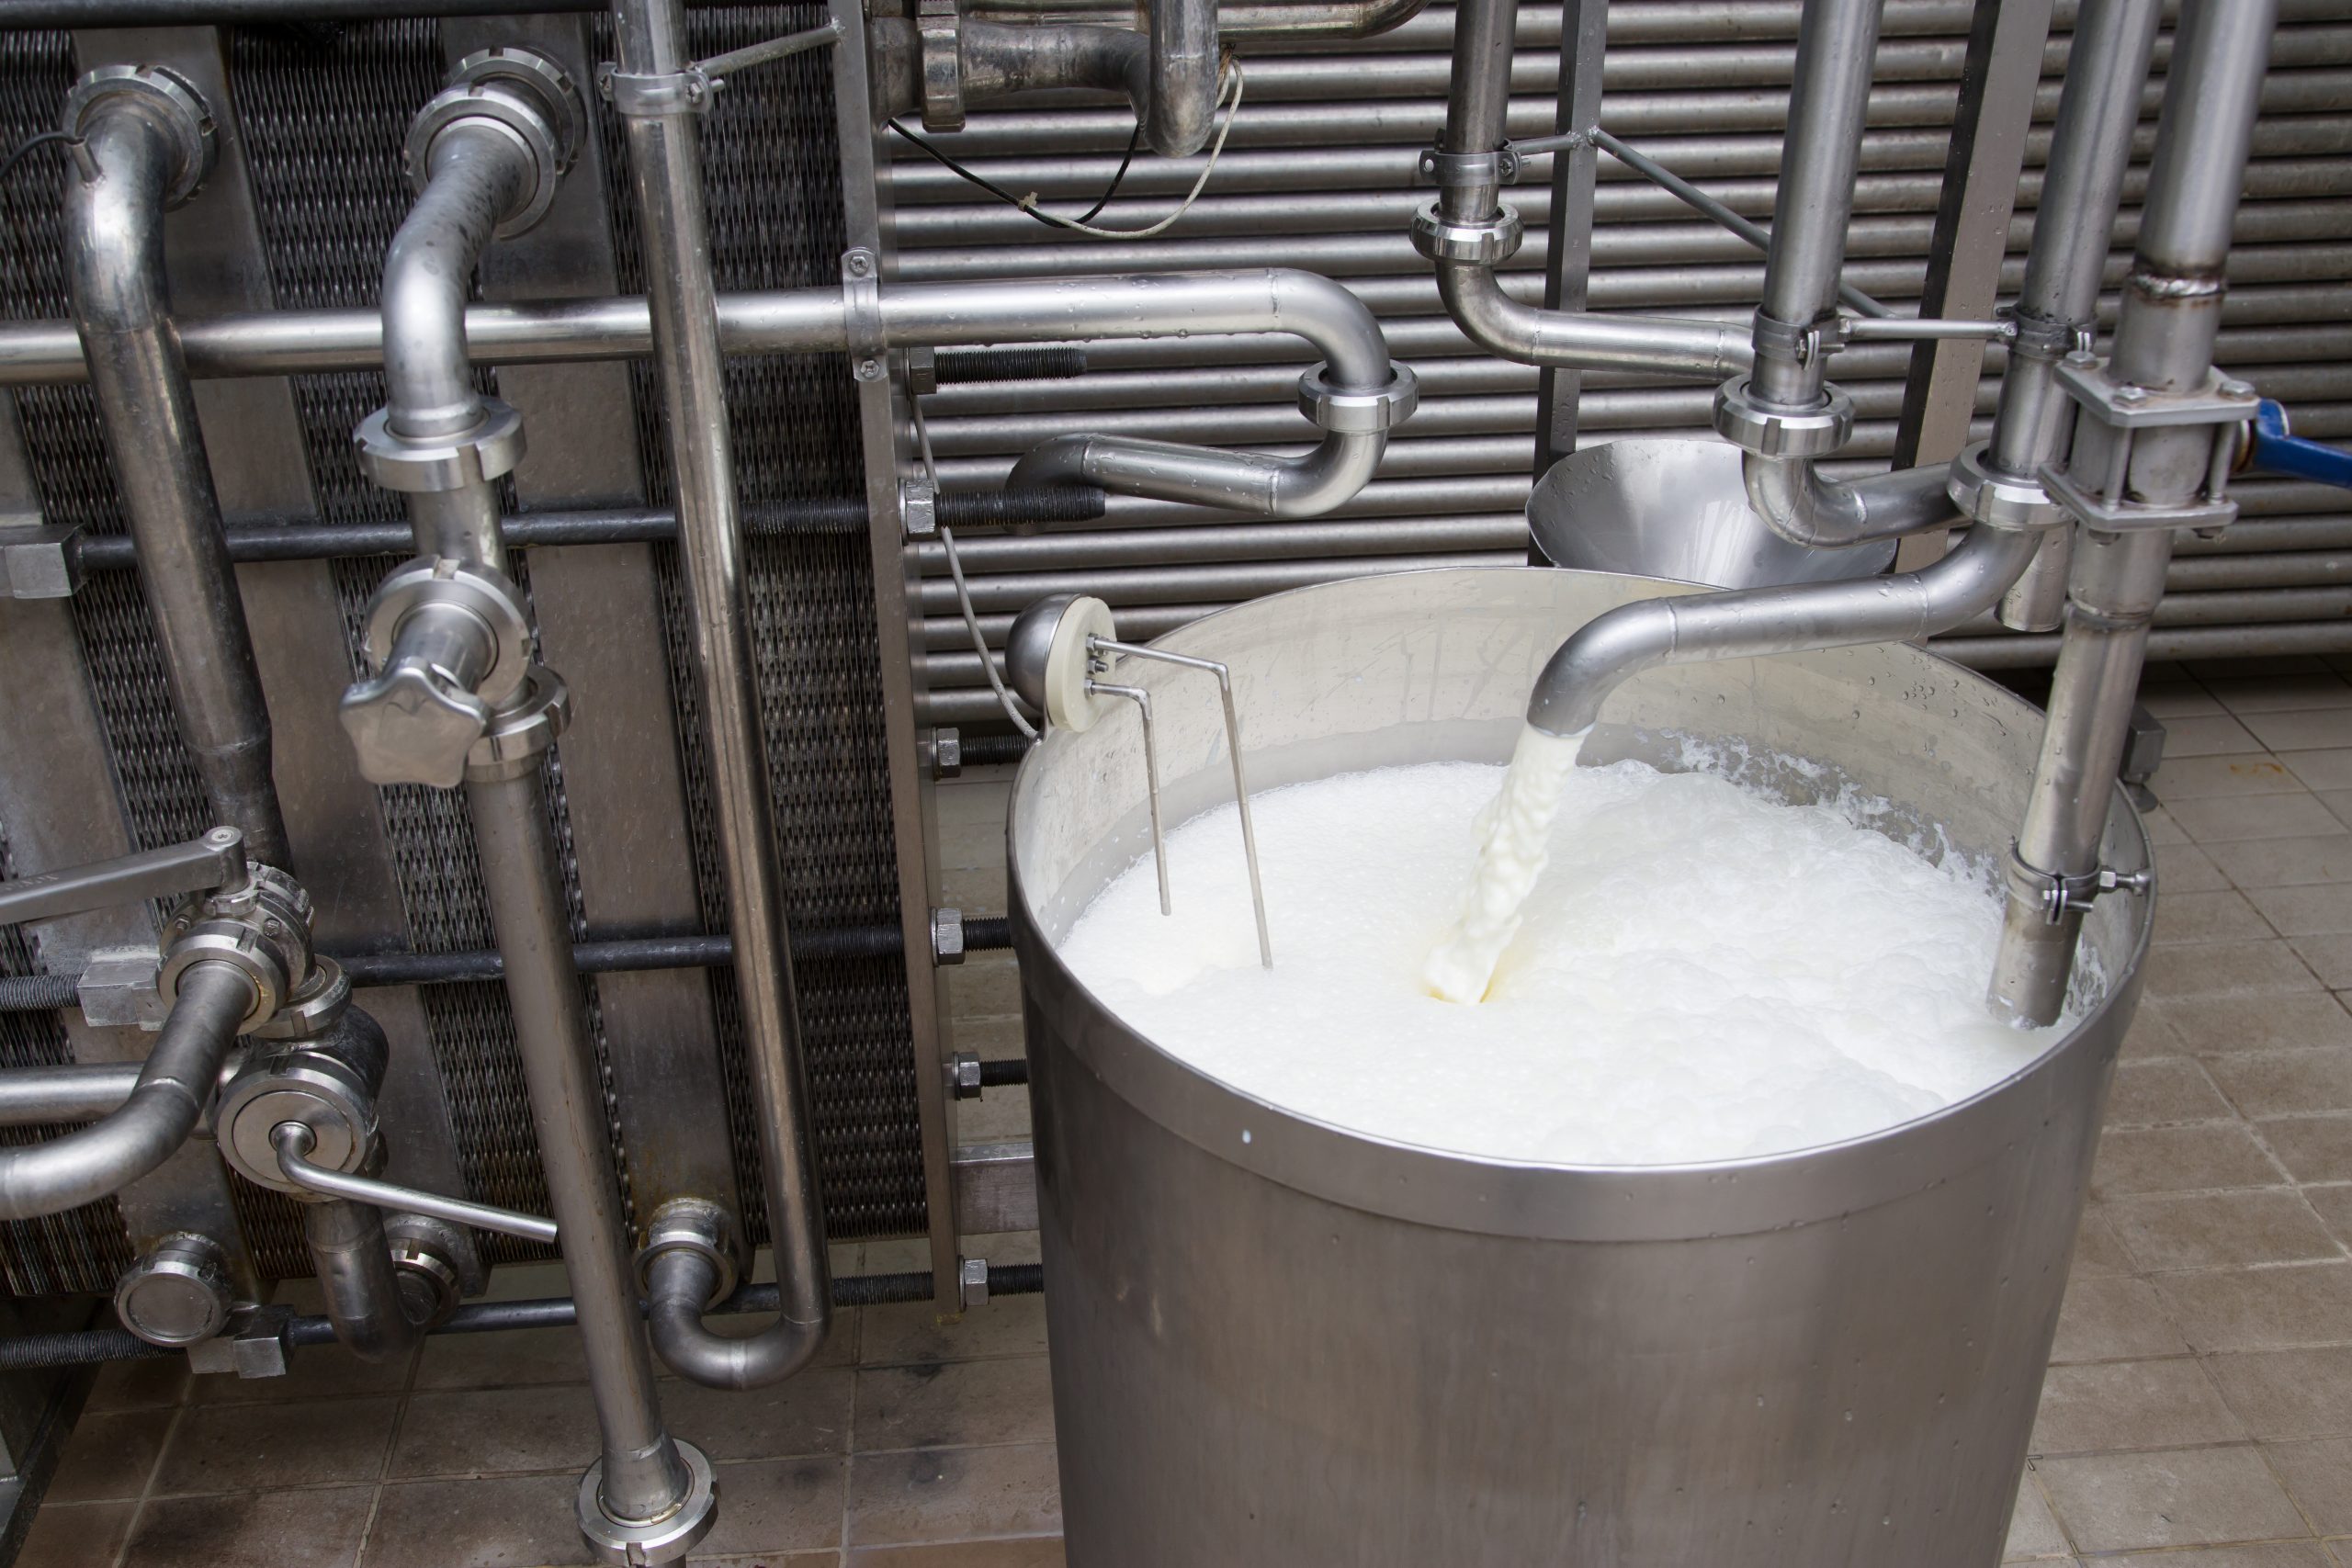 Process Of Filling The Milk Storage Tank  In Modern Dairy